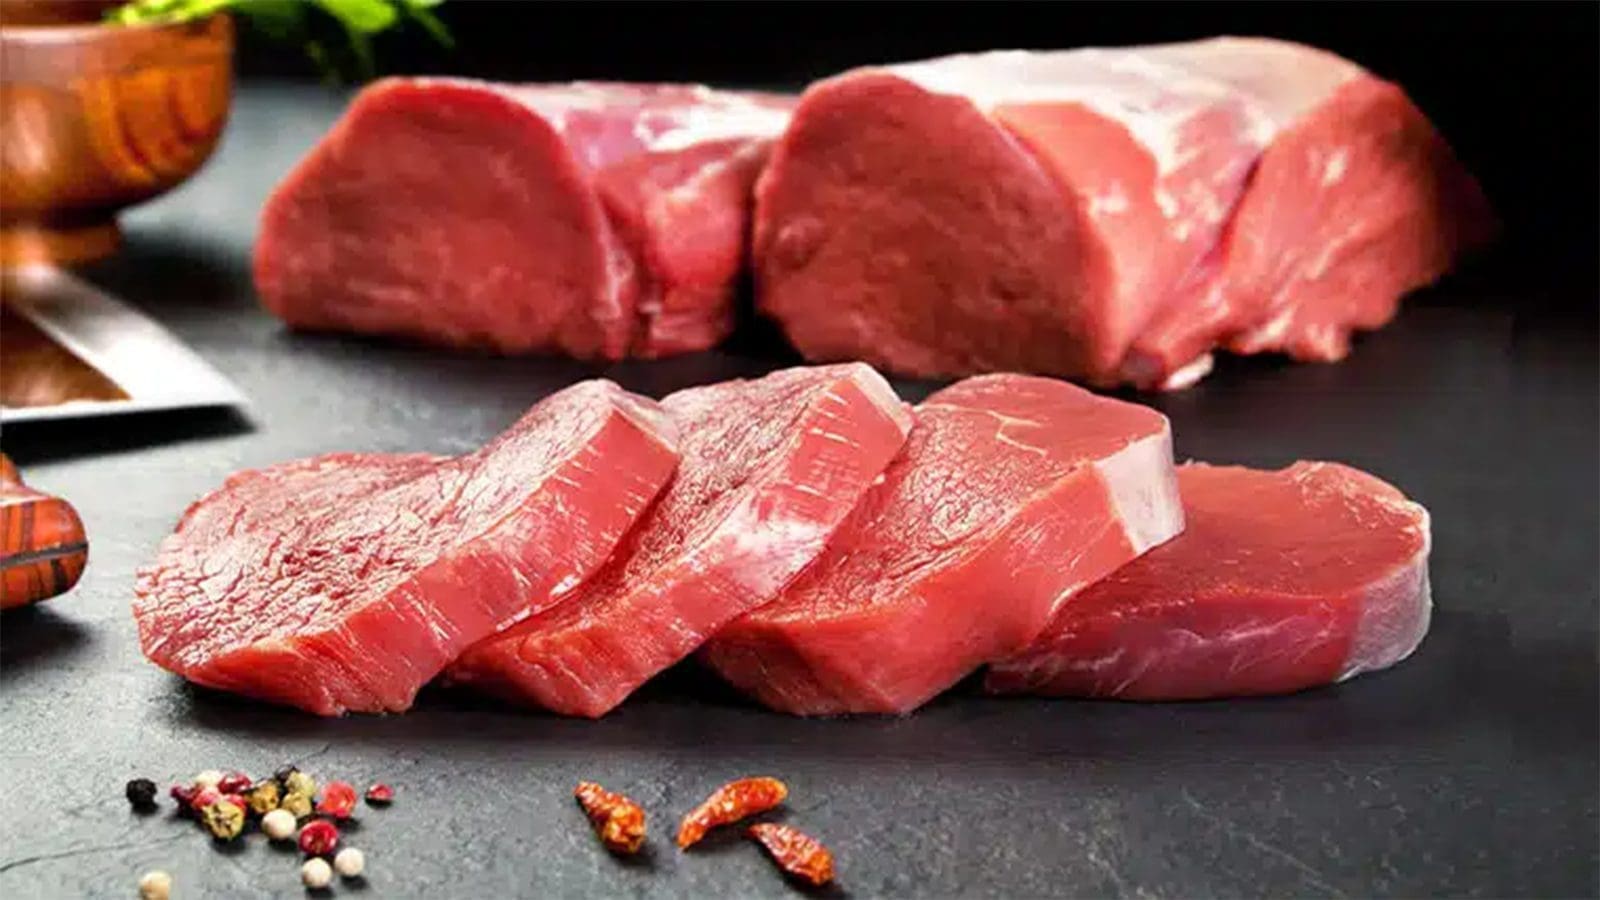 Research from Kenya, USA shows that E. coli in meat products can cause Urinary Tract Infections